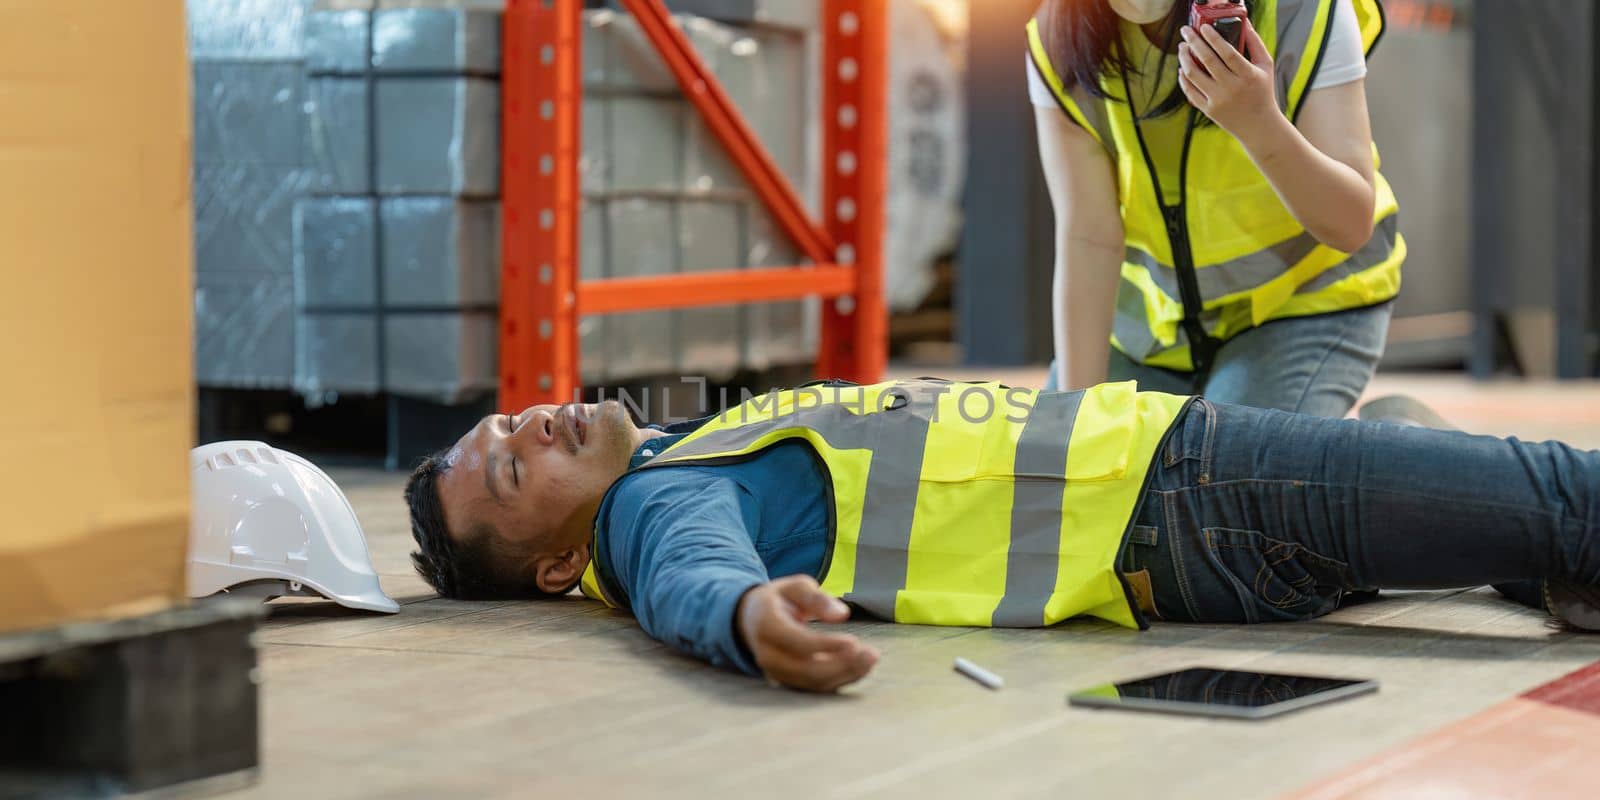 First aid by workmate. Working at warehouse. Male warehouse worker have accident